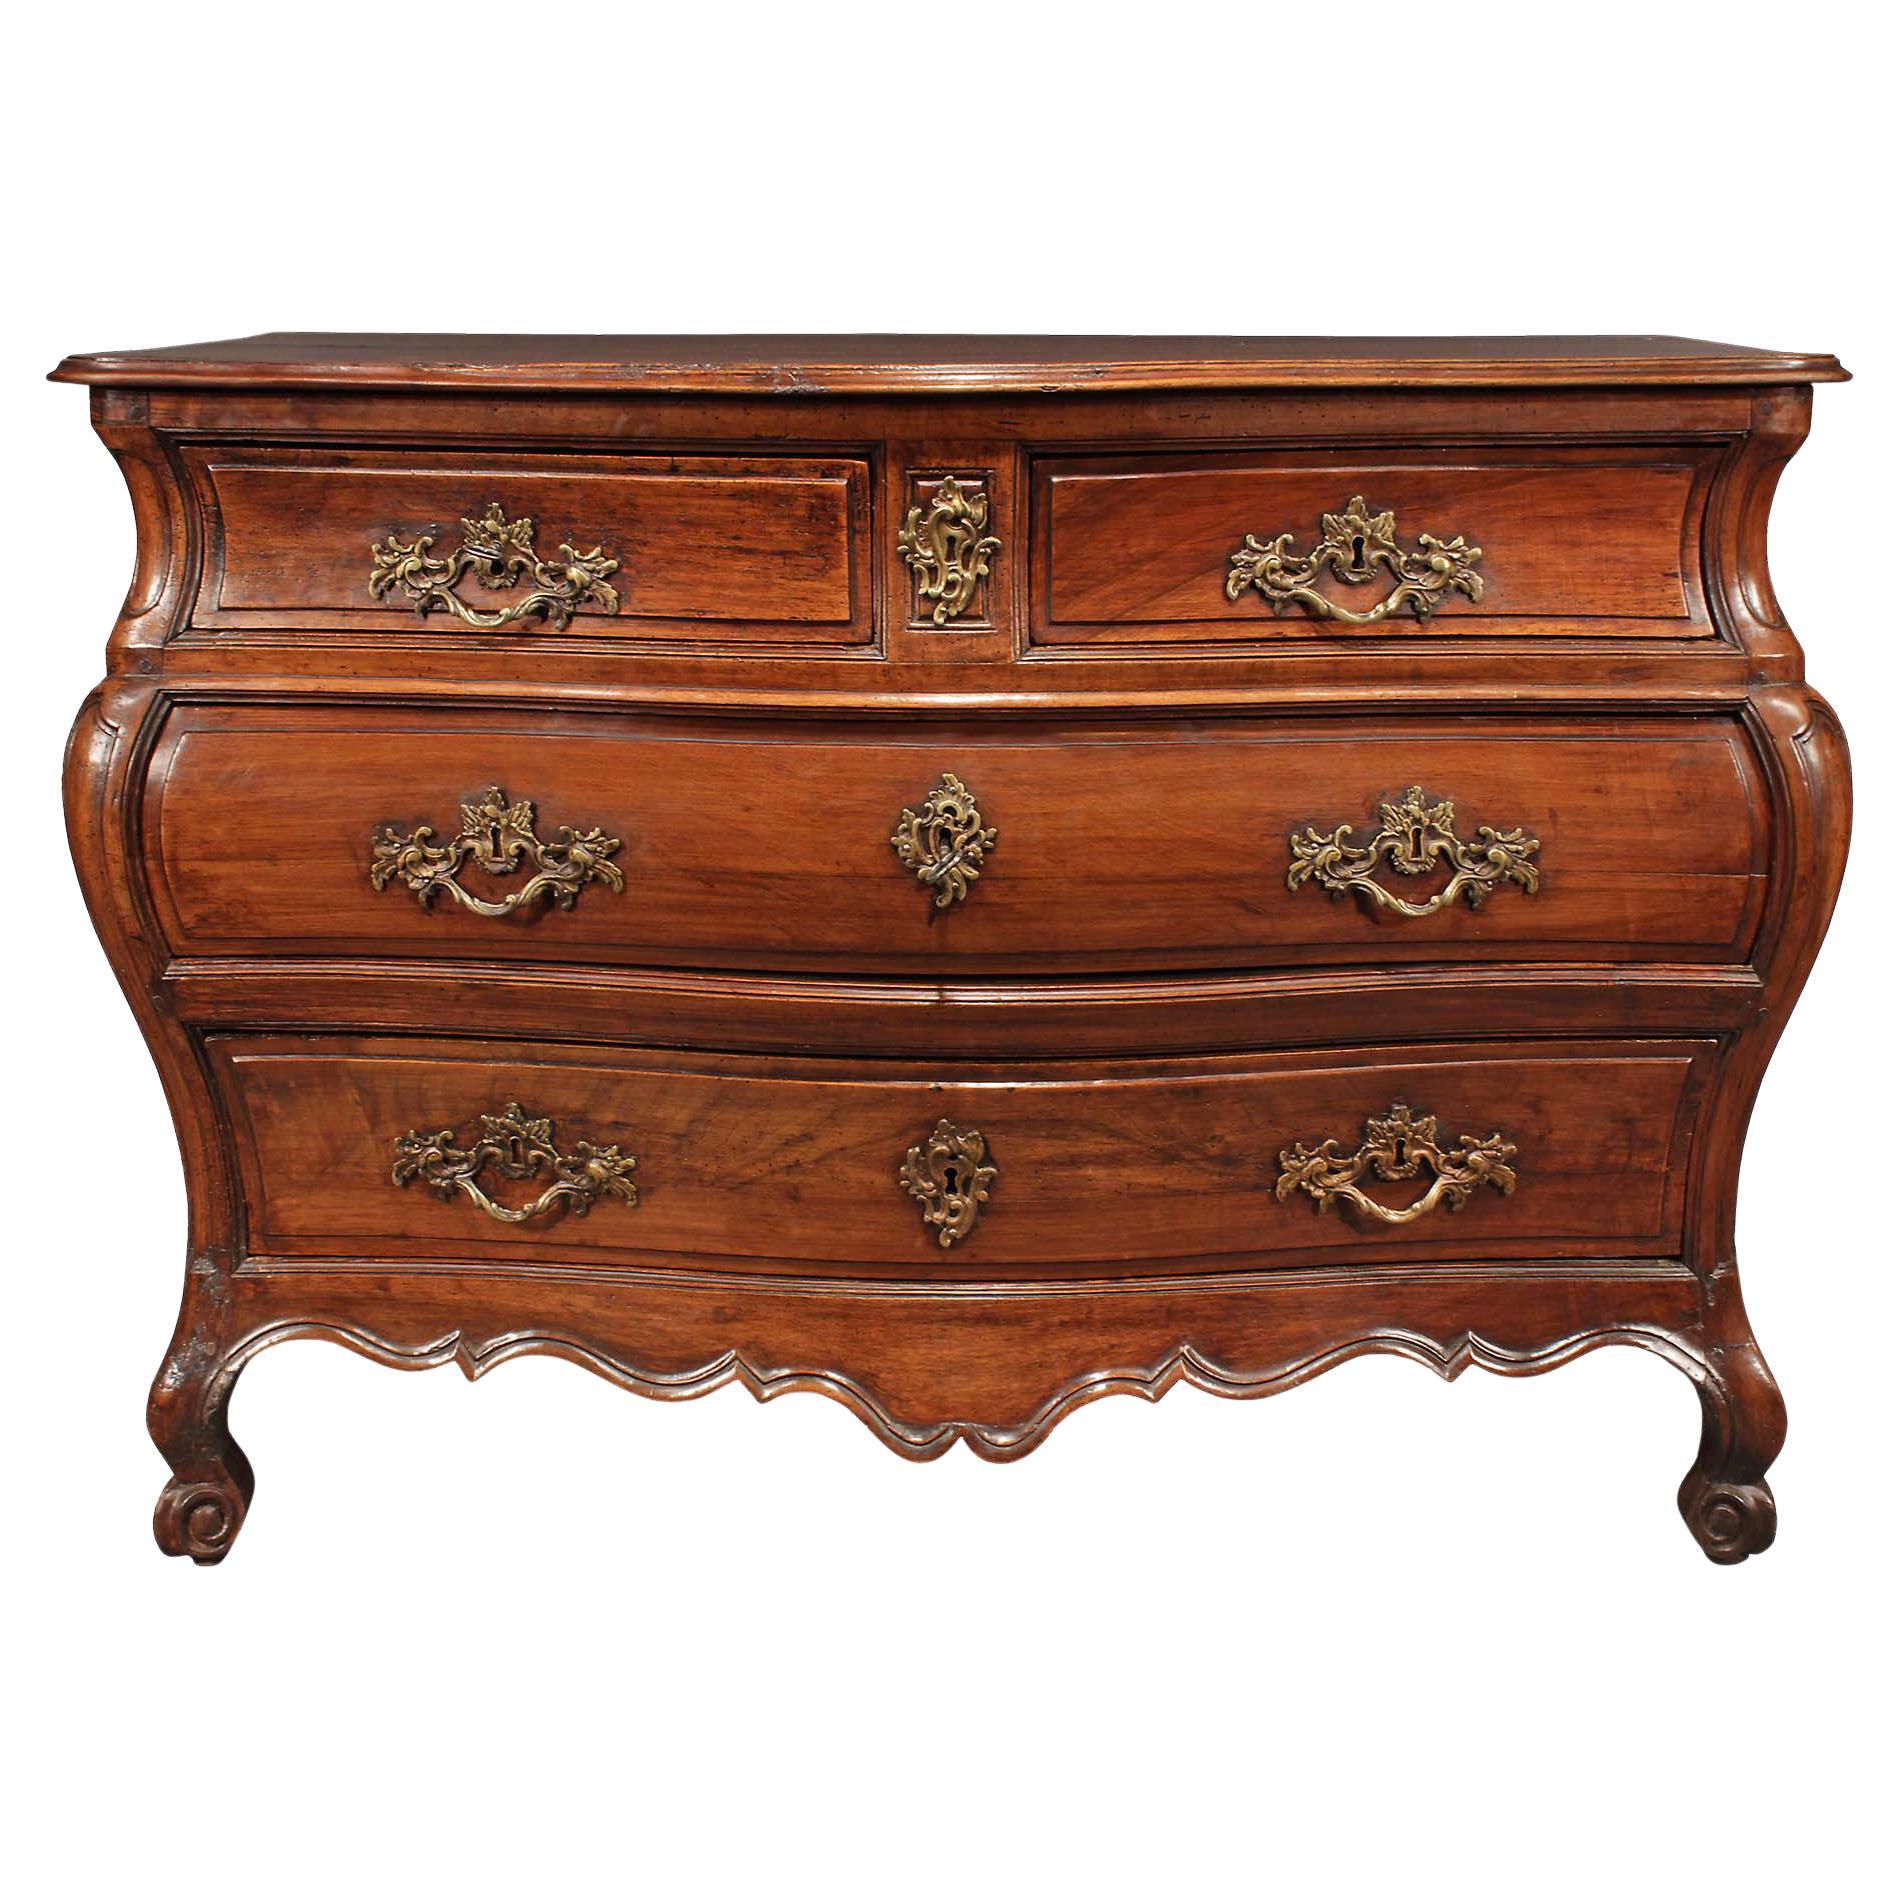 Period 18th Century French Louis XV Commode, Bordelaise For Sale at 1stDibs